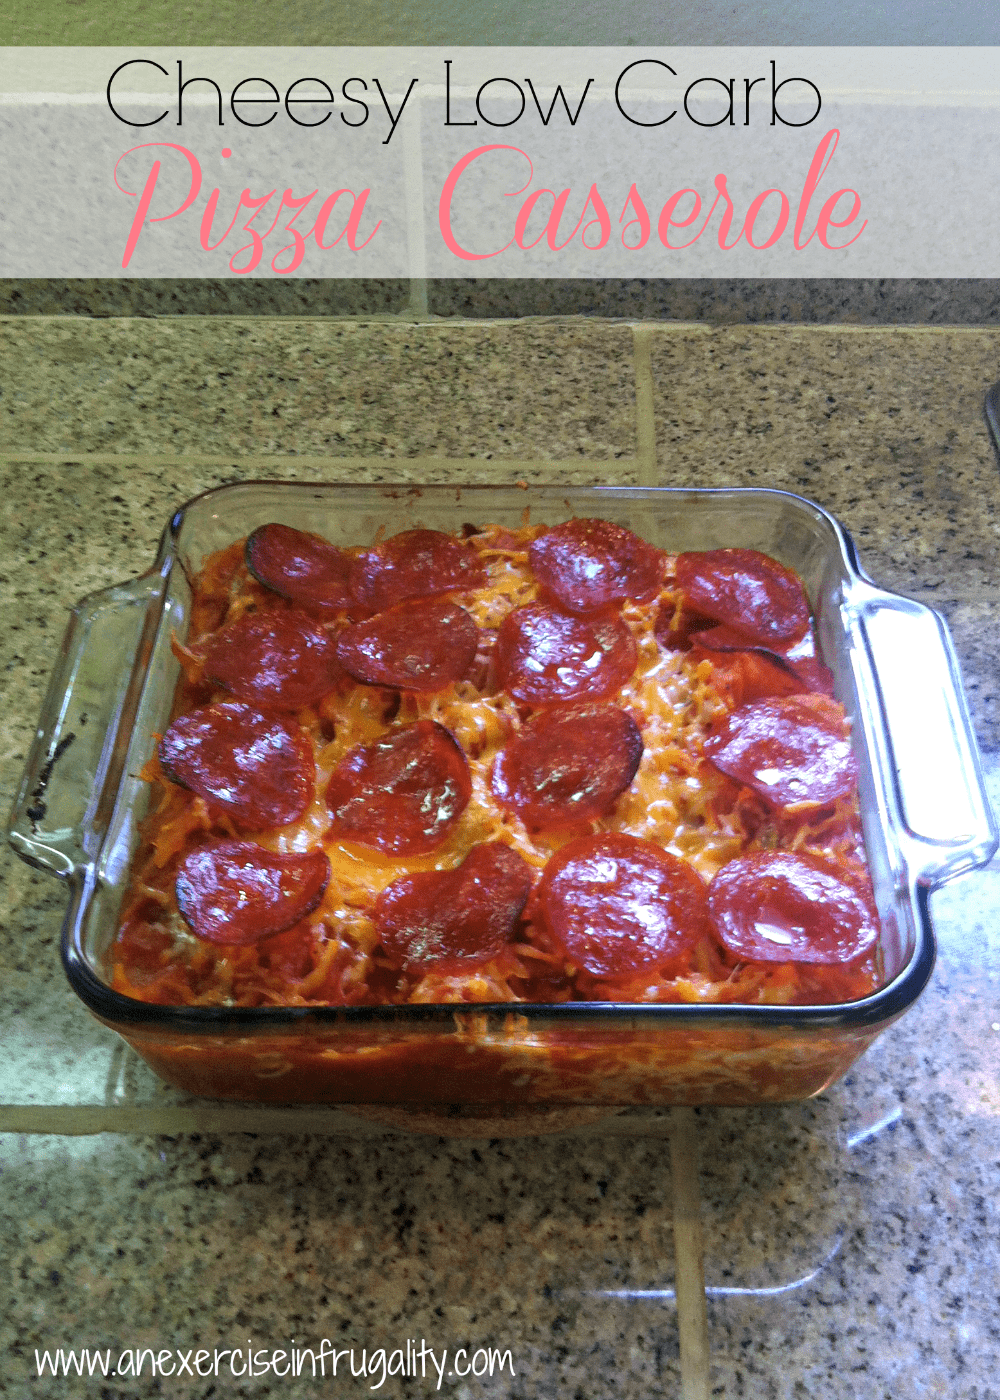 Cheesy Low Carb Pizza Casserole - An Exercise In Frugality